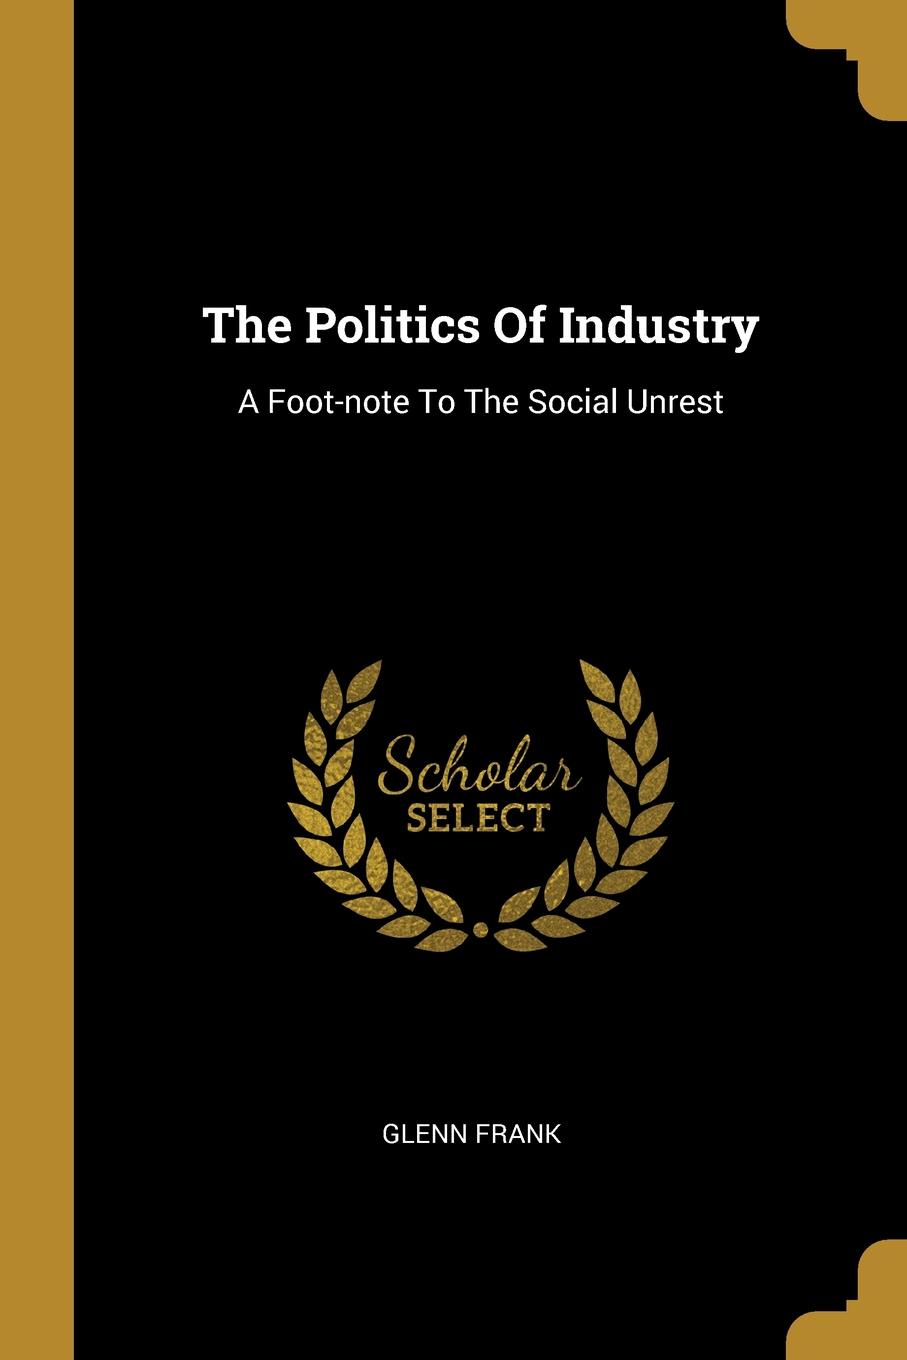 The Politics Of Industry. A Foot-note To The Social Unrest